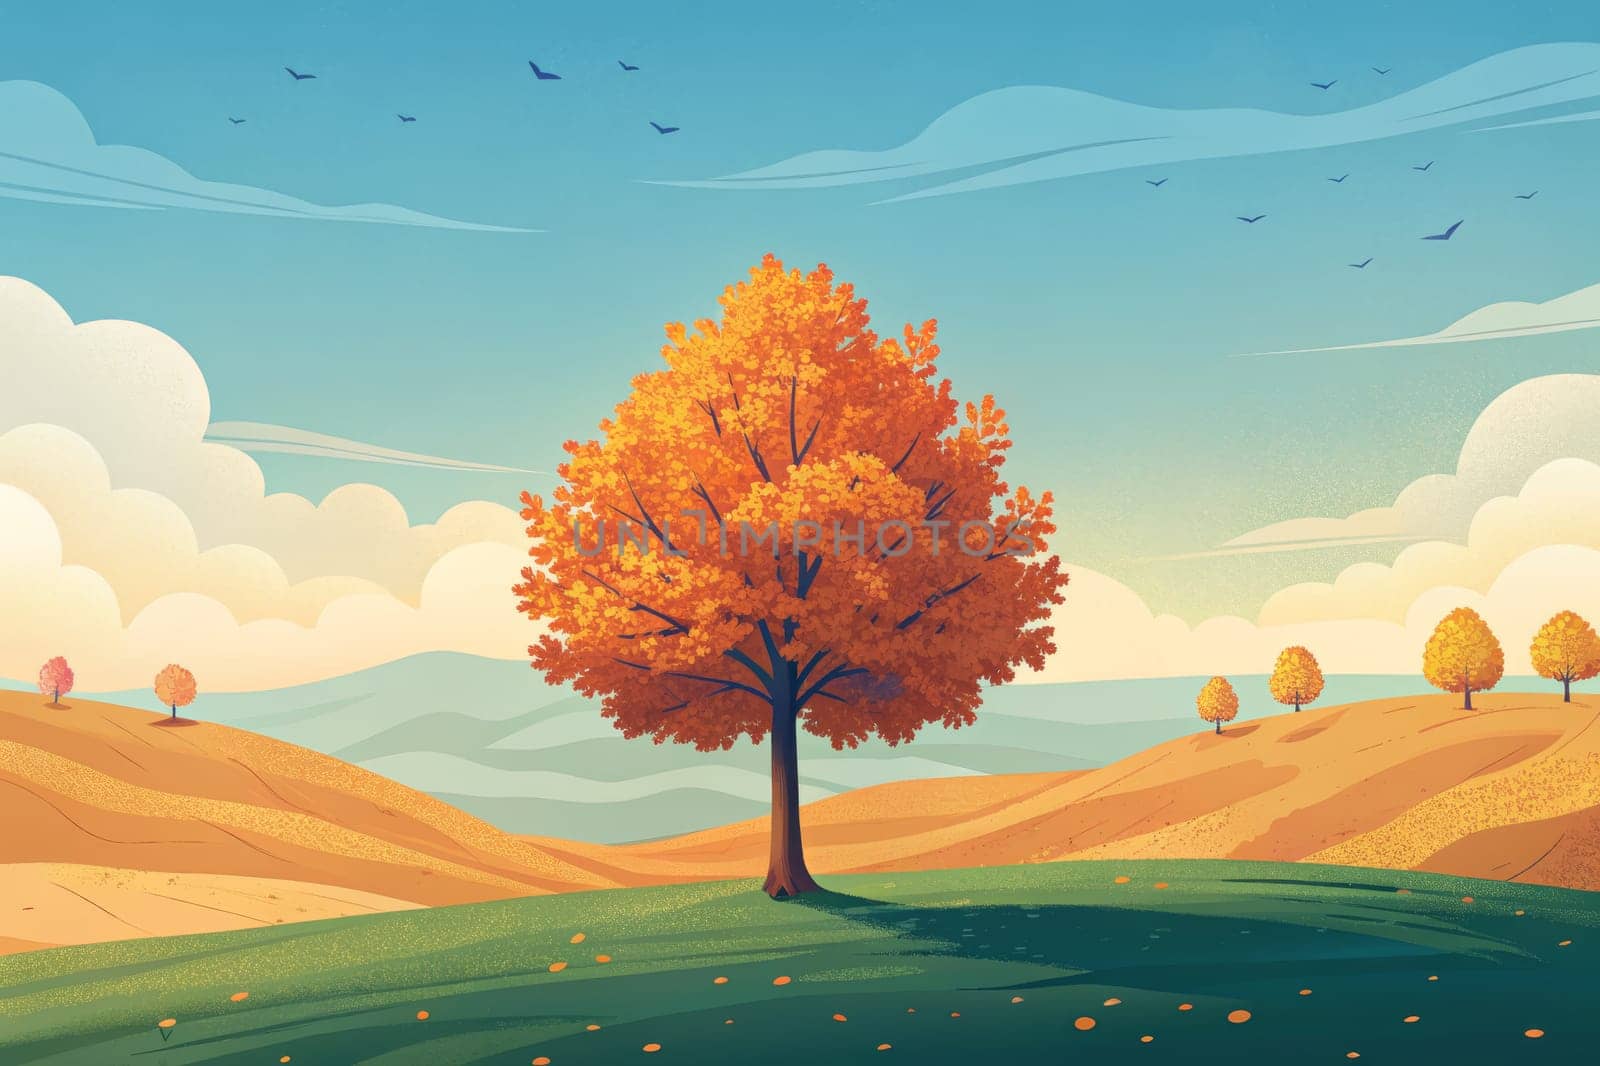 A lone, vibrant orange tree stands in the middle of a rolling, grassy hill. The tree's leaves are in full autumn glory, providing a splash of color against the blue sky and the rolling hills in the background. The sky is dotted with fluffy white clouds and a few flying birds, completing the peaceful autumn scene.